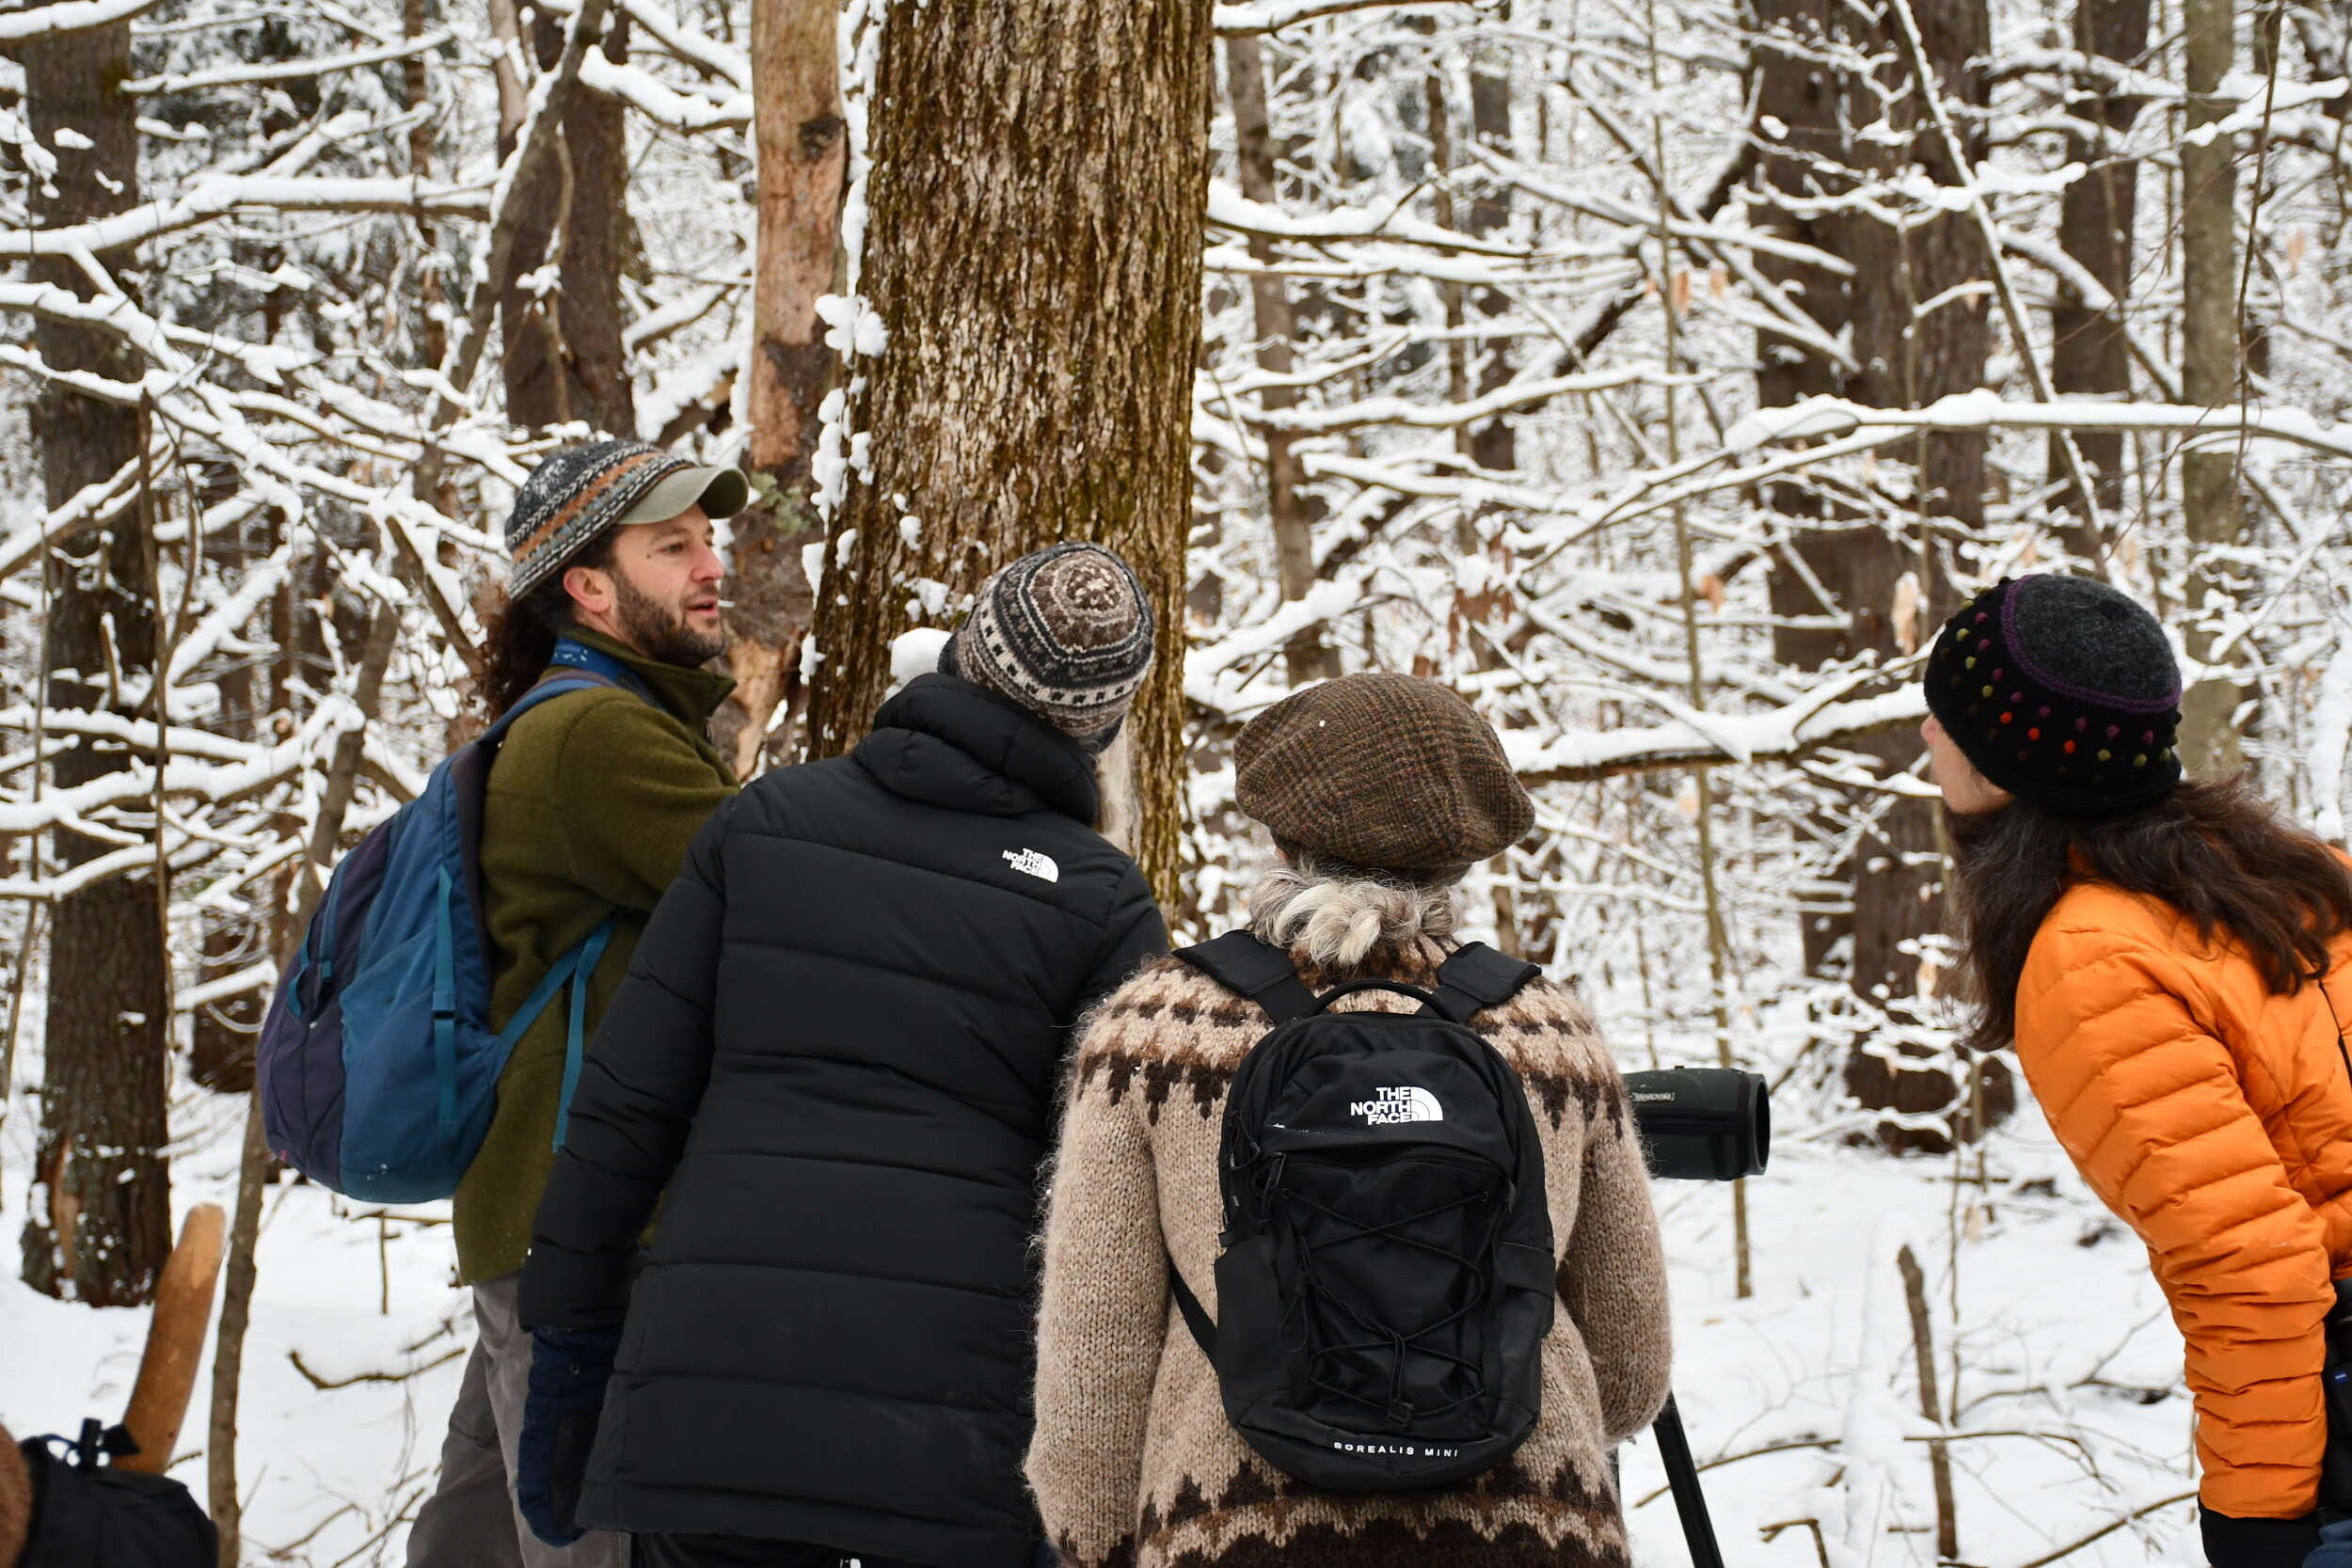 Phil explains something to three onlookers in a snowy forest. (photo © Audrey Dunn)